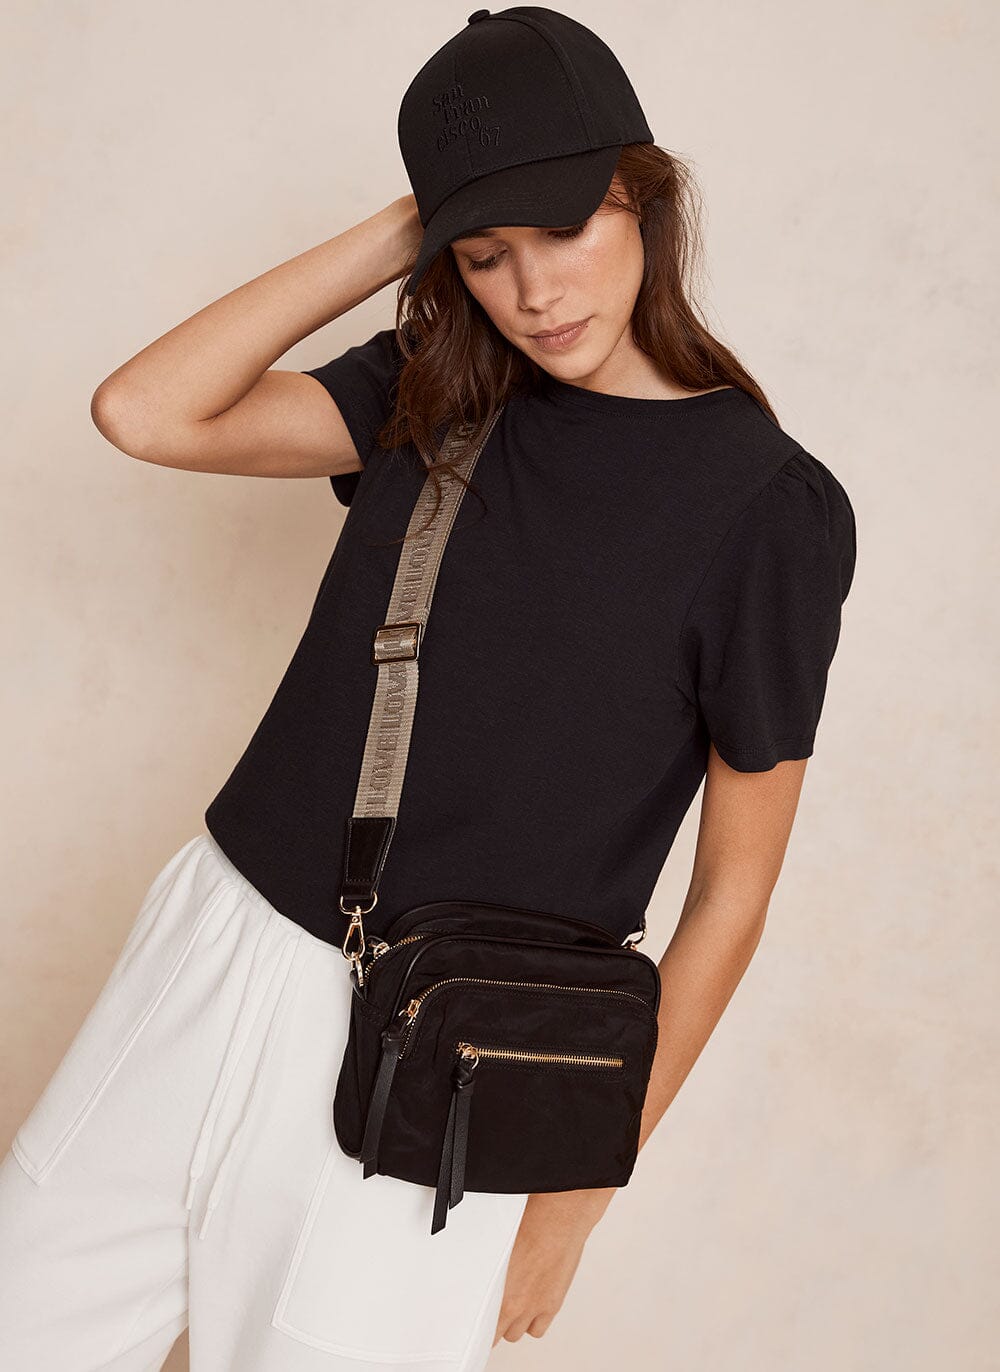 Details 76+ small cross body bags latest - in.cdgdbentre